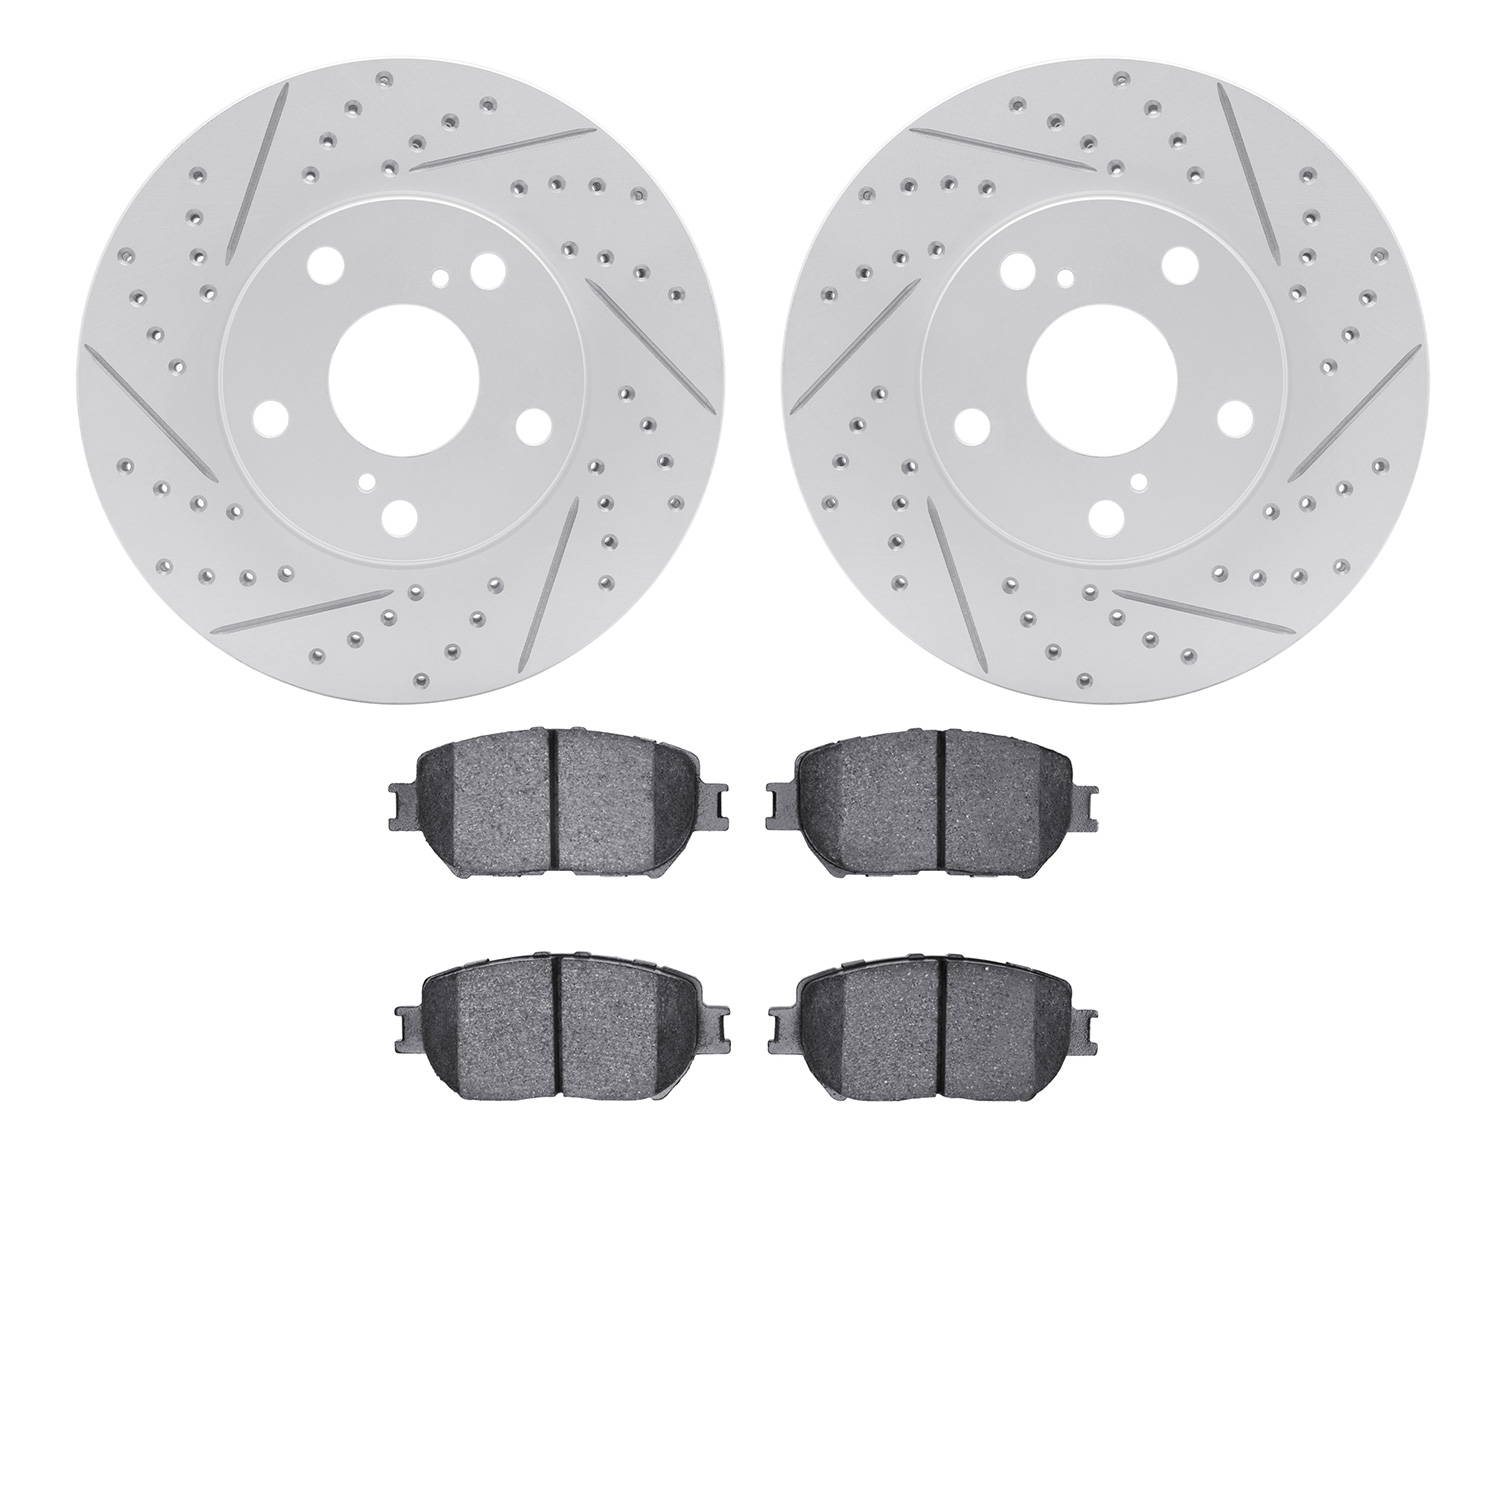 2502-76003 Geoperformance Drilled/Slotted Rotors w/5000 Advanced Brake Pads Kit, 2002-2006 Lexus/Toyota/Scion, Position: Front